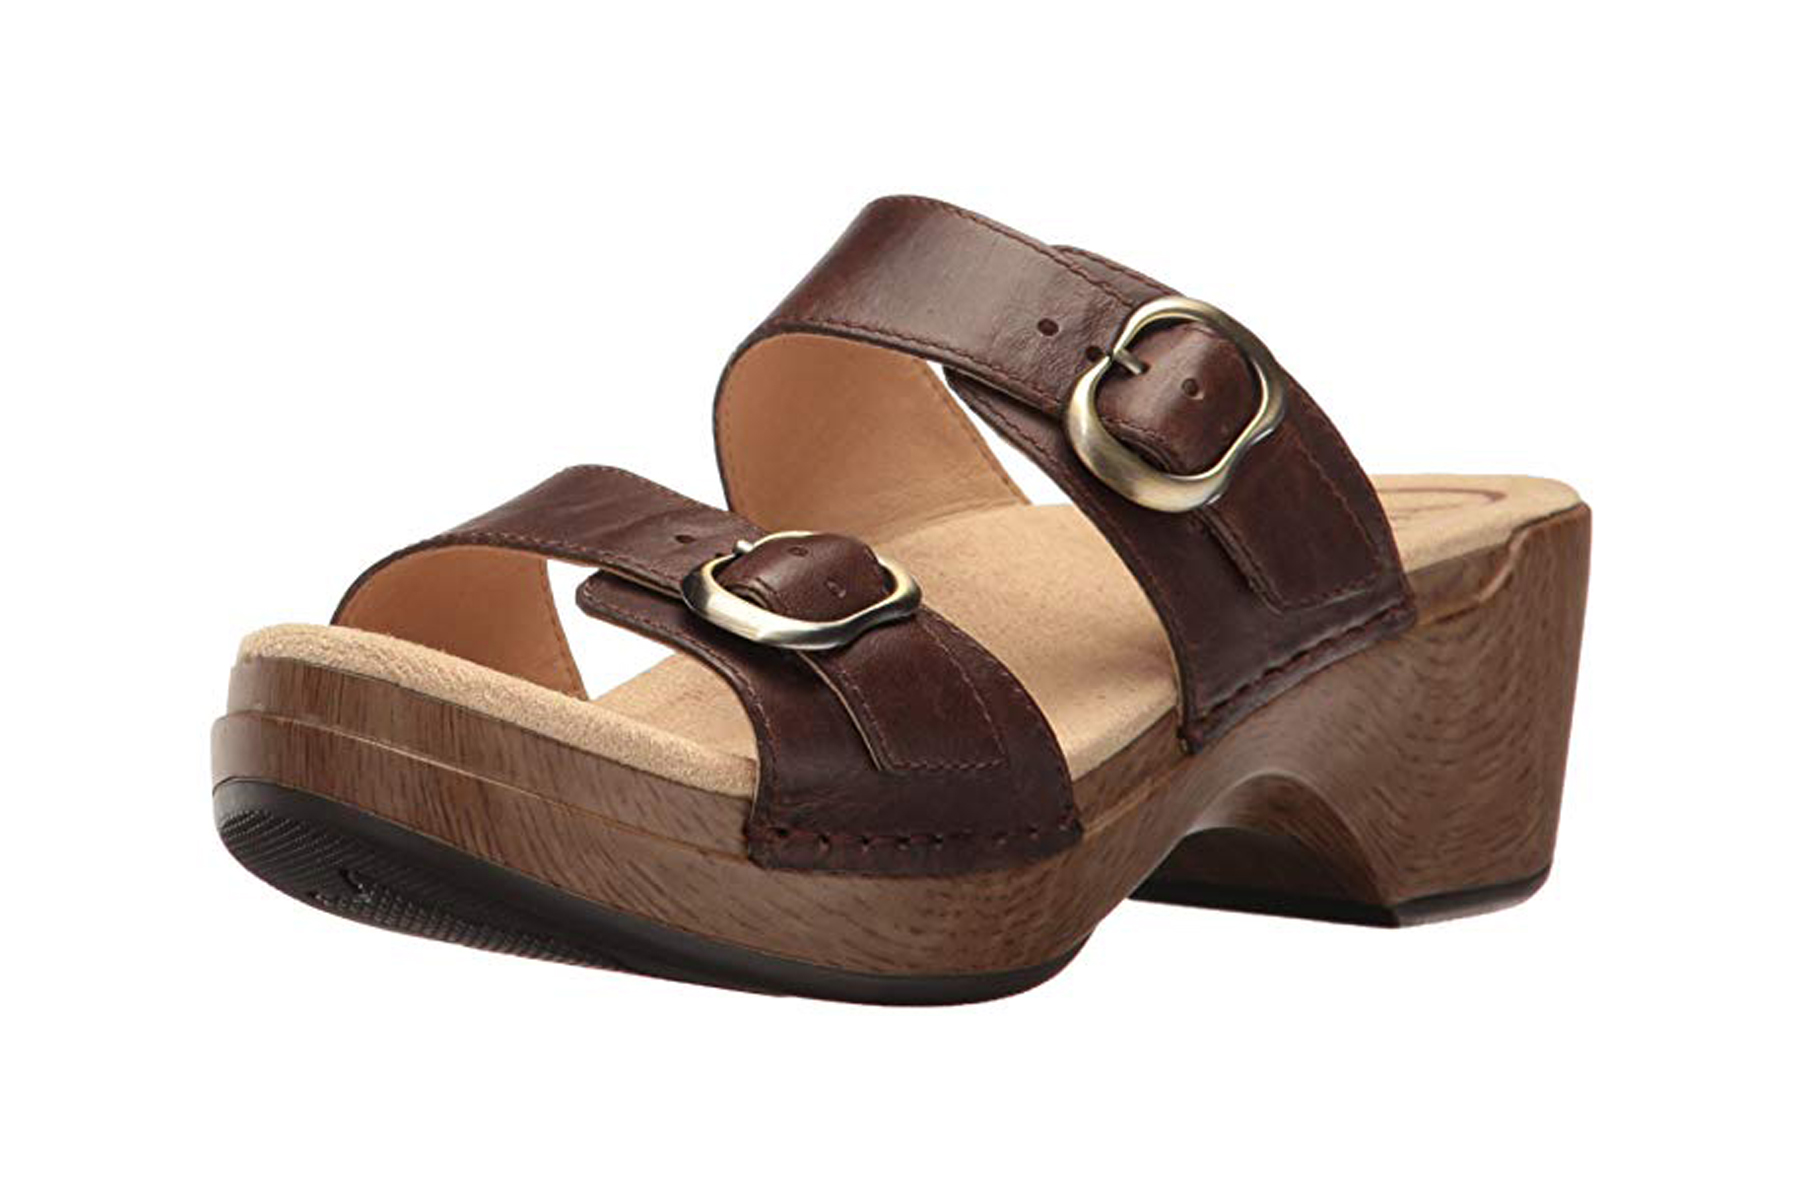 10 Best Orthotic Sandals for Women Over 50 That Are Super Cute